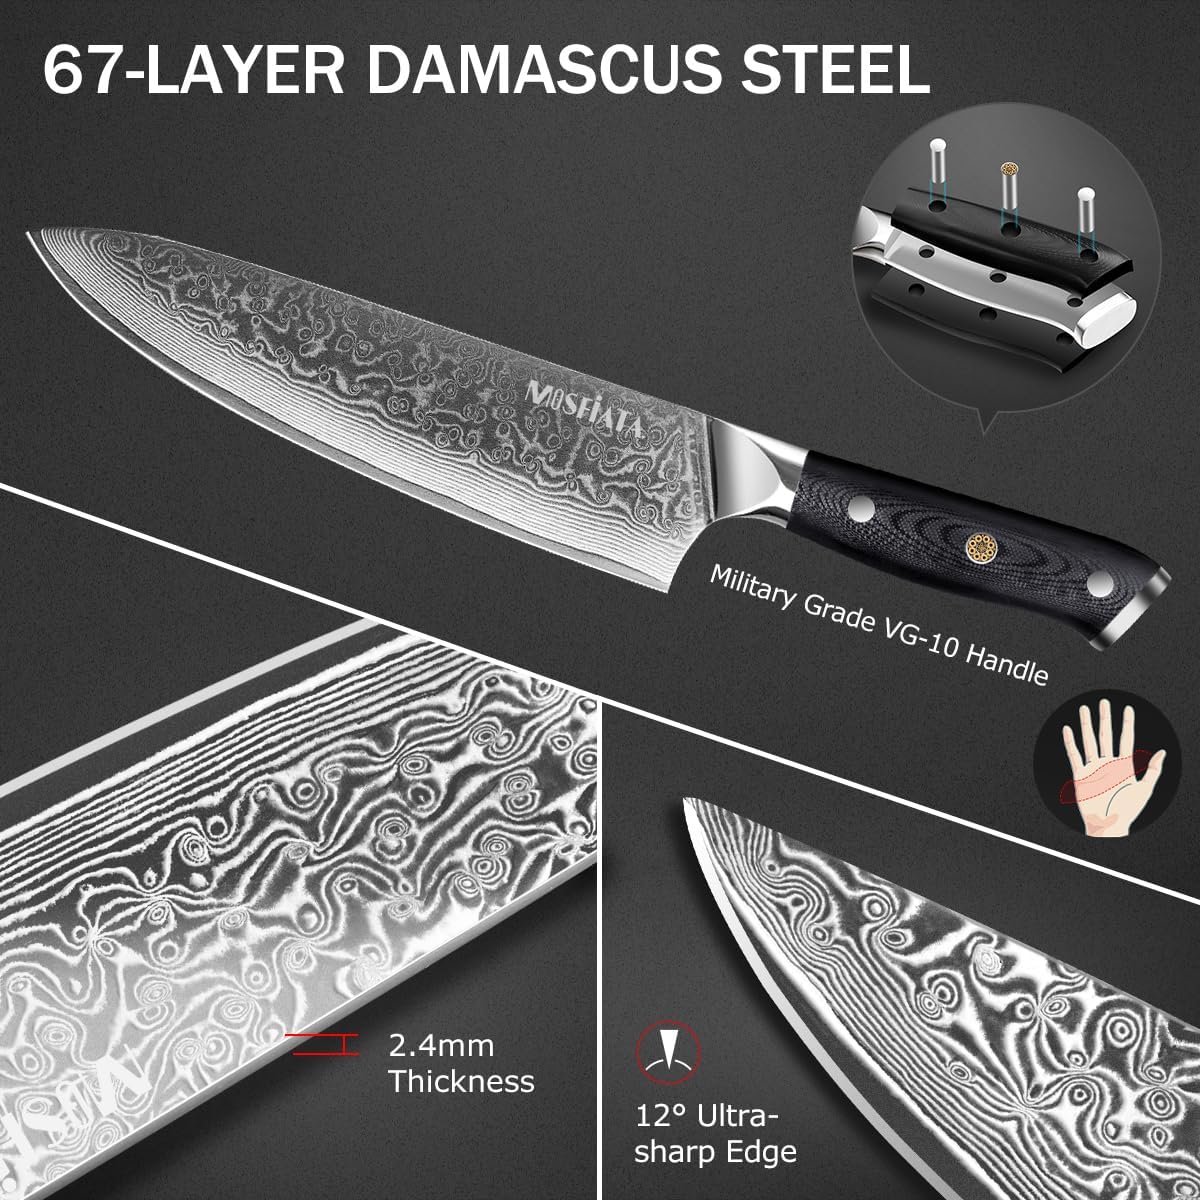 7 Piece Complete Knife Set Damascus VG10 Steel Ultra Sharp Professional  Knives with G10 Handles